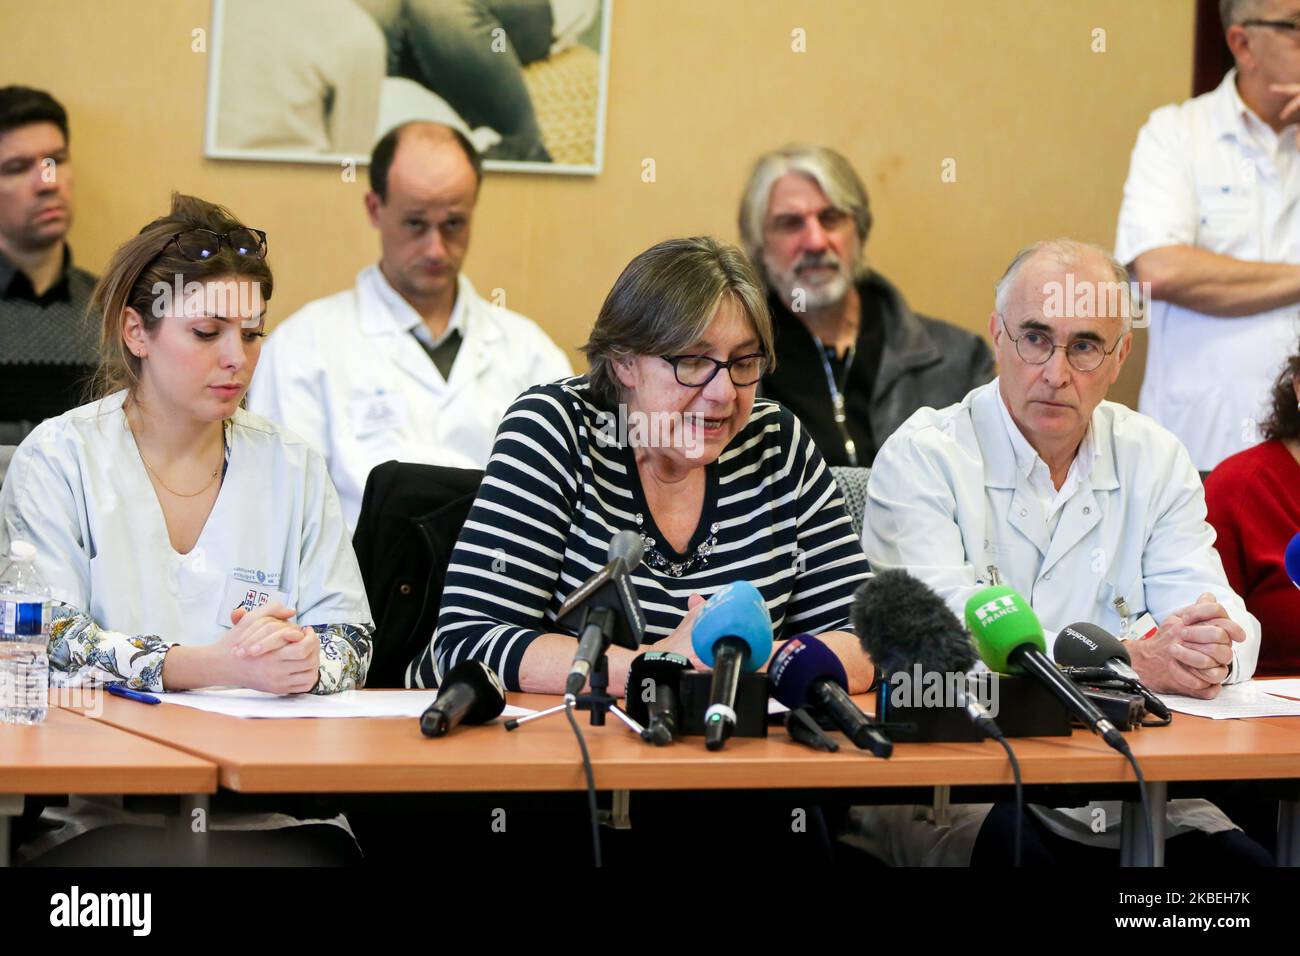 Members of the 'CIH - Collectif Inter Hopitaux' (Inter-hospitals collective) give a press conference after the publication of a collective resignation letter to protest against the emergency plan proposed by the government, at the Pitie-Salpetriere hospital in Paris on January 14, 2020. More than 1,000 hospital doctors, including some 600 heads of medical departments, published on January 14 a letter to 'collectively resign' from their administrative duties if French Health and Solidarity Minister does not start 'negotiations' on the hospital's budget and salaries. (Photo by Michel Stoupak/Nur Stock Photo